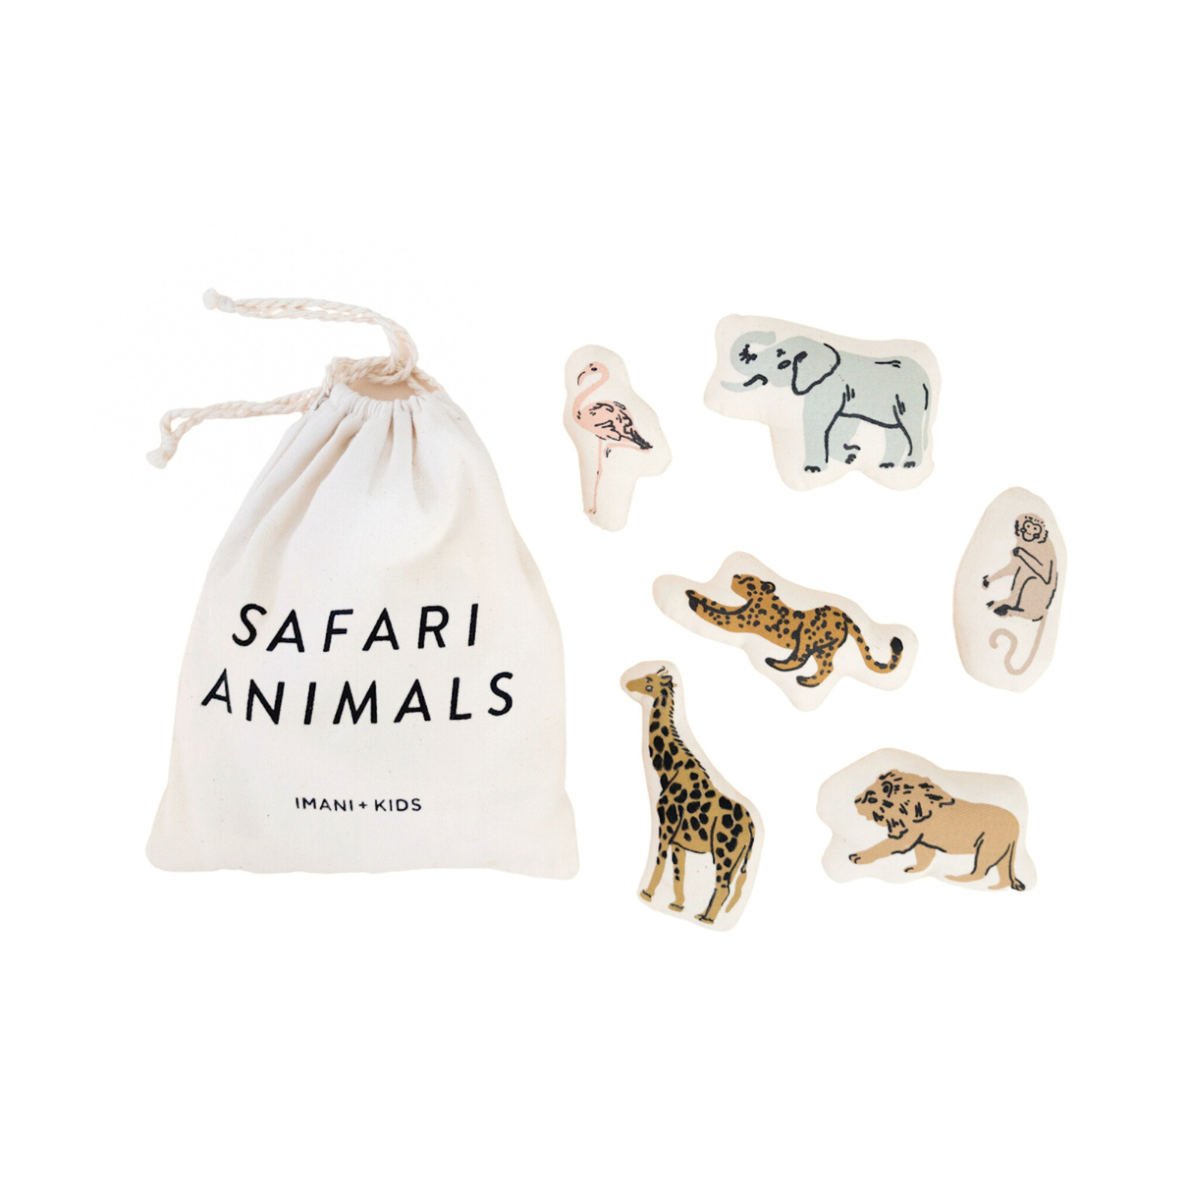 Safari Pillow Set  Imani + KIDS by Imani Collective   -better made easy-eco-friendly-sustainable-gifting